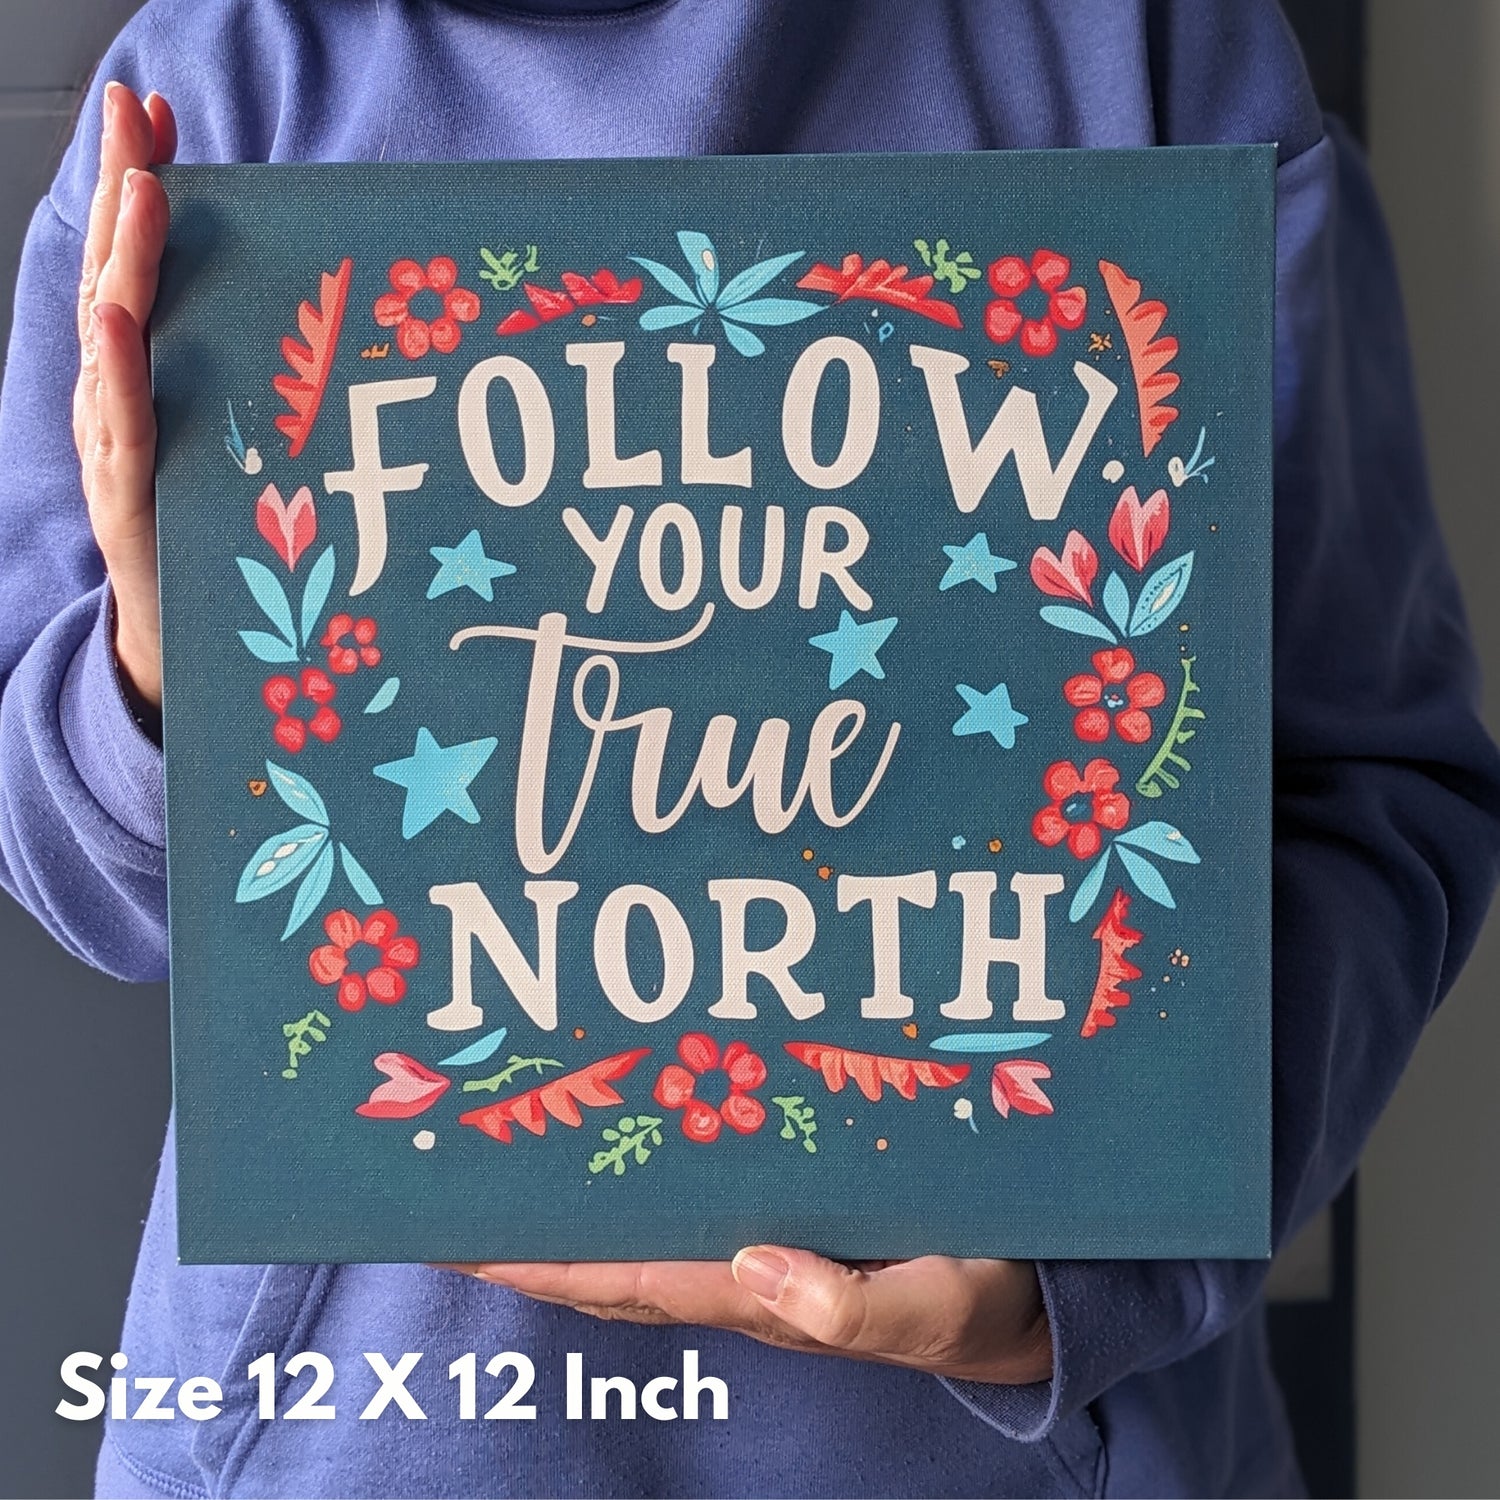 Lighted Inspirational Wall Art - Follow Your True North - Life & Apples